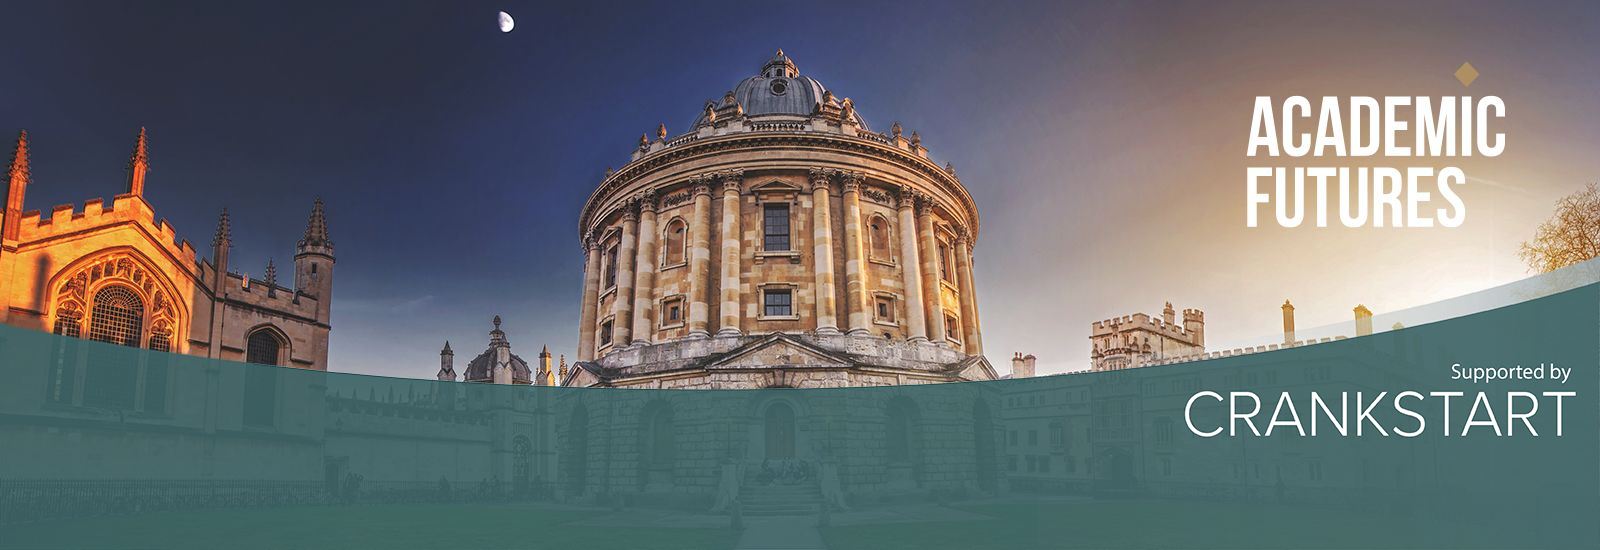 An image of the Radcliffe Camera, Academic Futures supported by Crankstart